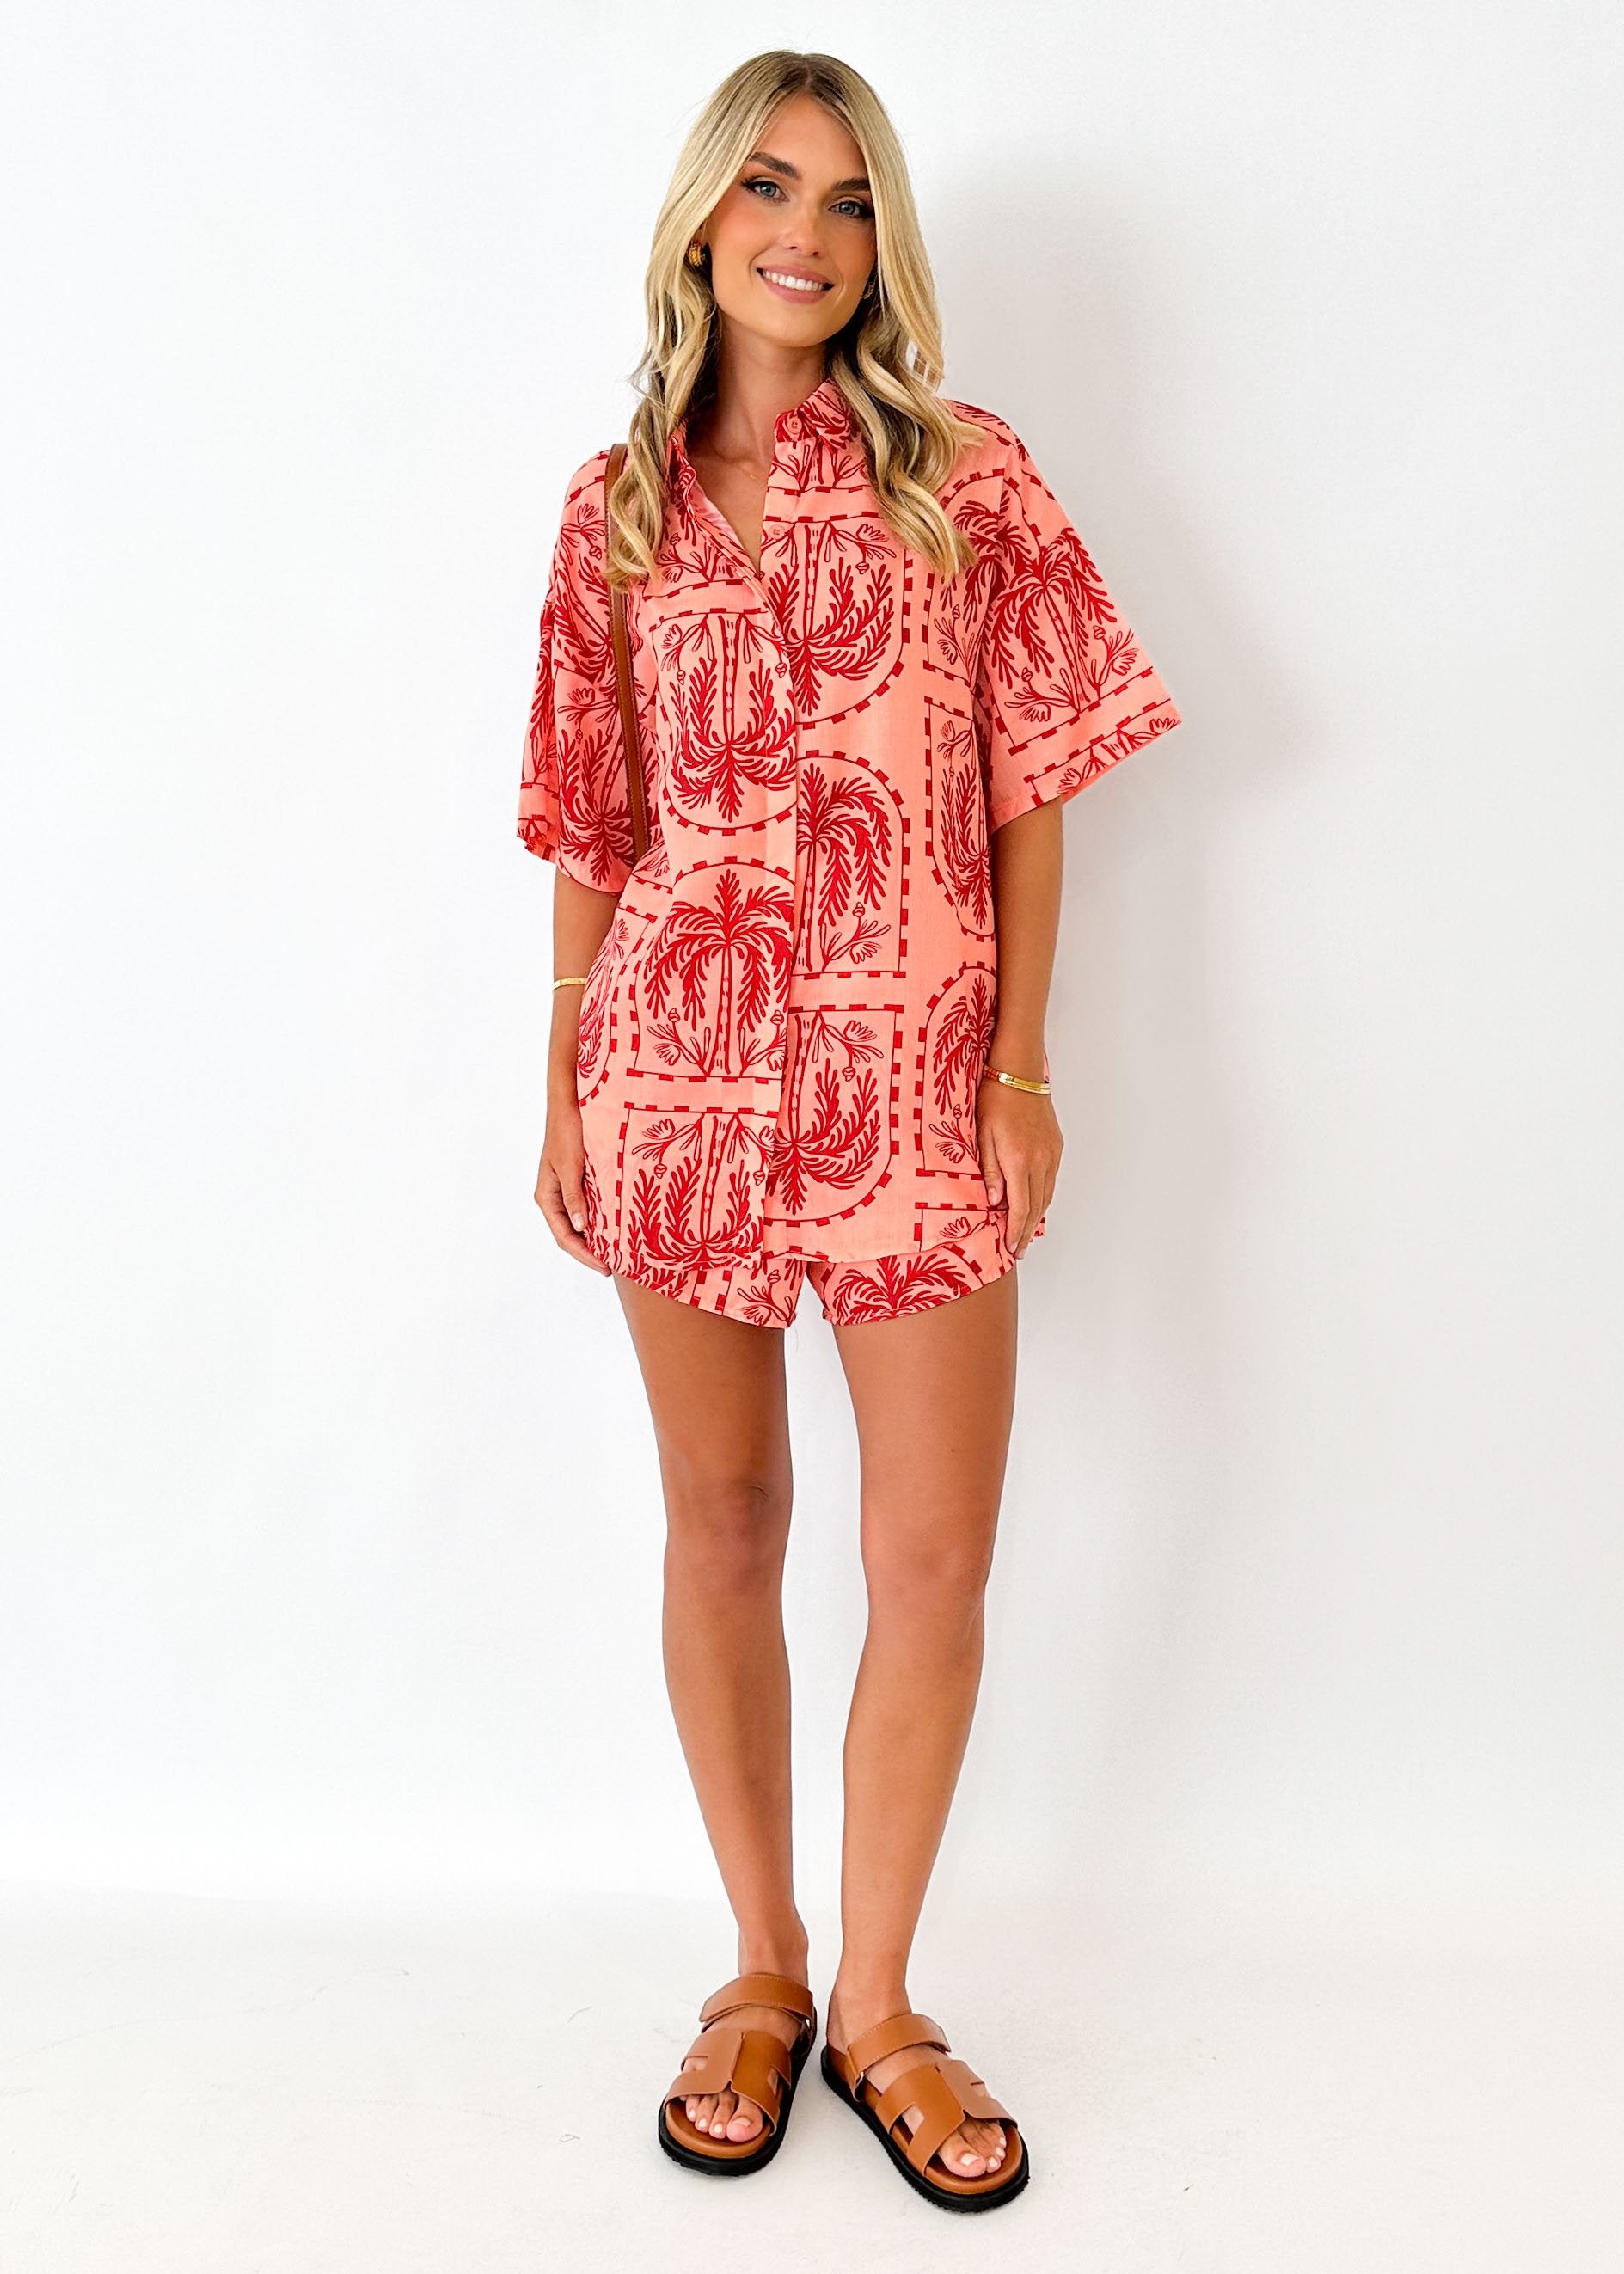 Parie Shorts - Red Palm